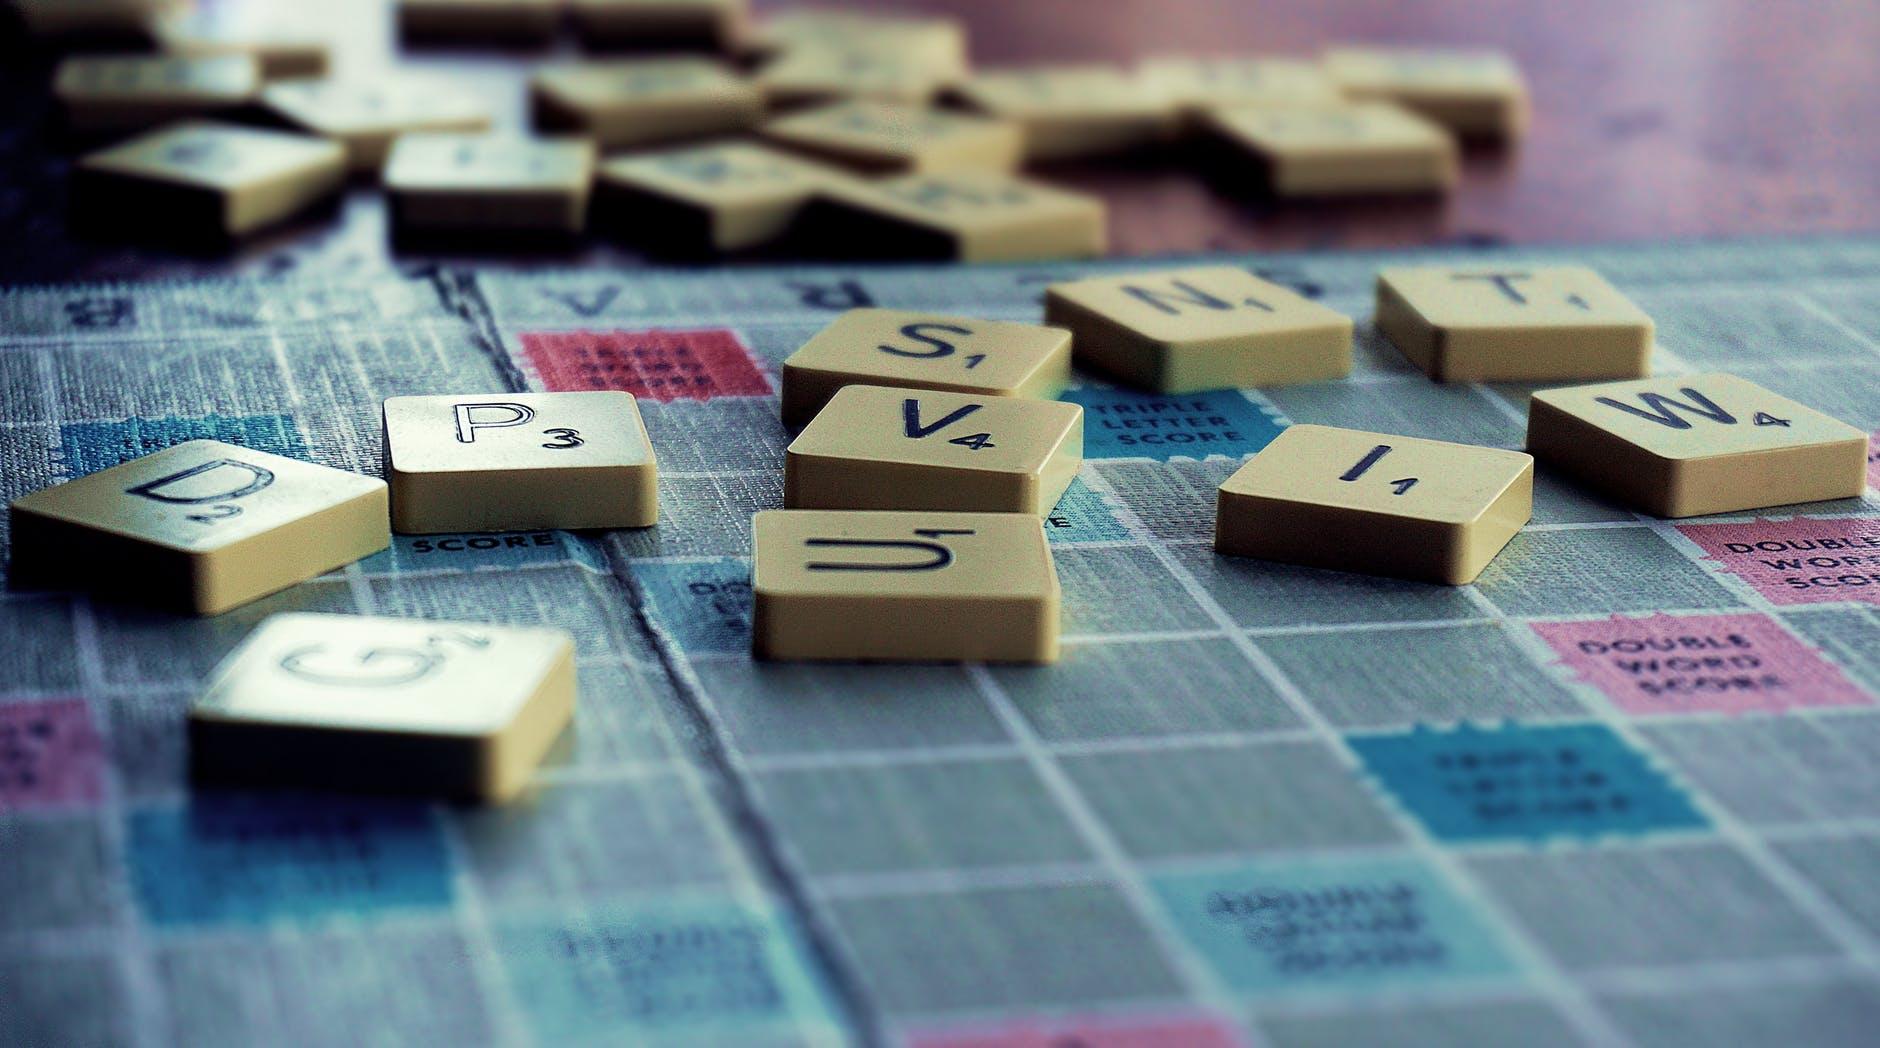 Top 5 word scrabble mobile apps that offer an exception Scrabble experience